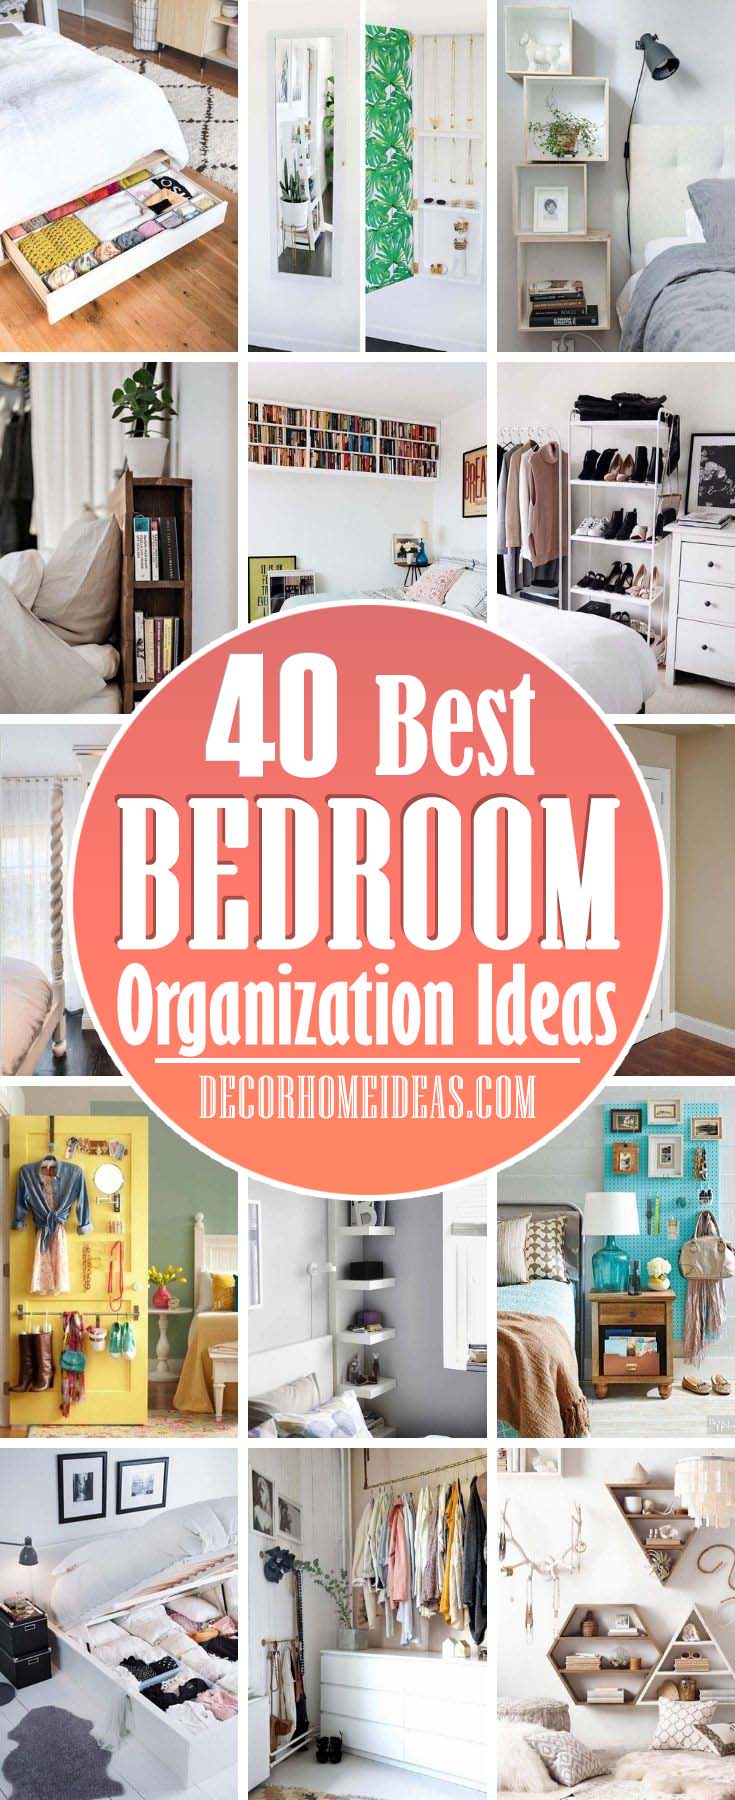 Best Bedroom Organization Ideas. Keep your bedroom neat and tidy at all times with easy tricks. Check out our 40 ideas for bedroom organization to optimize your space. #decorhomeideas